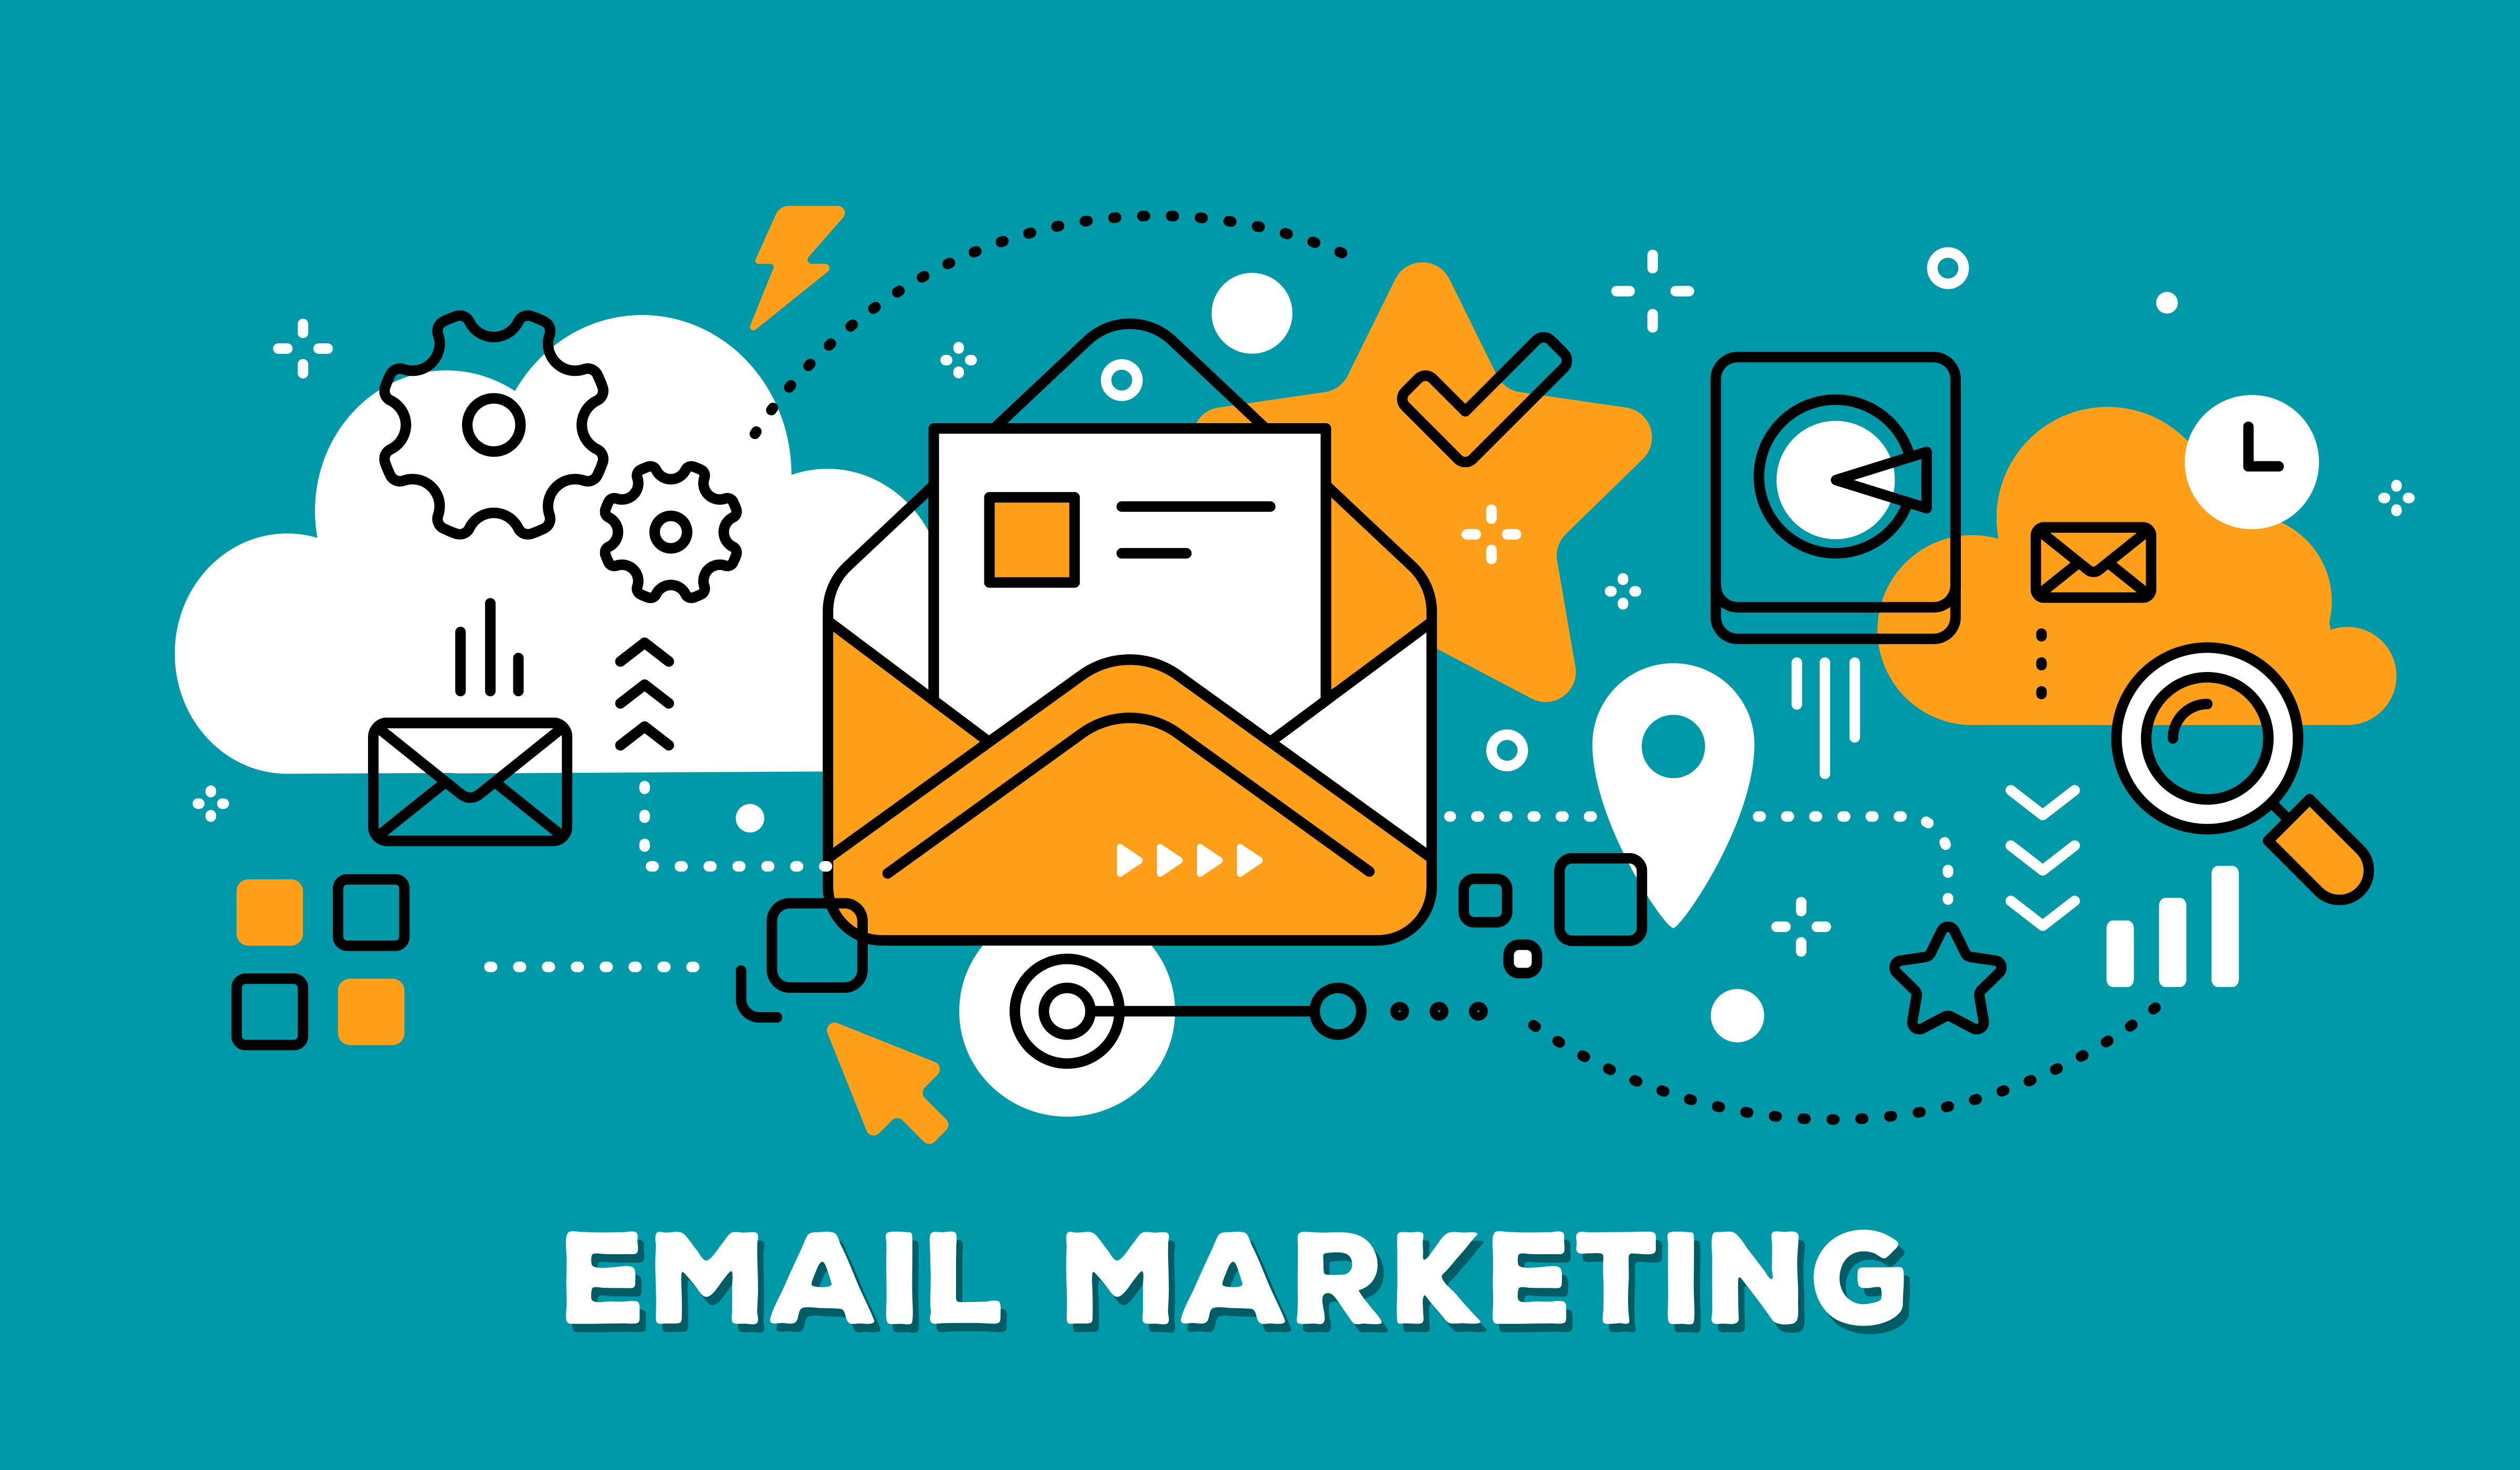 How to Choose the Right Email Marketing Platform for Your Business?